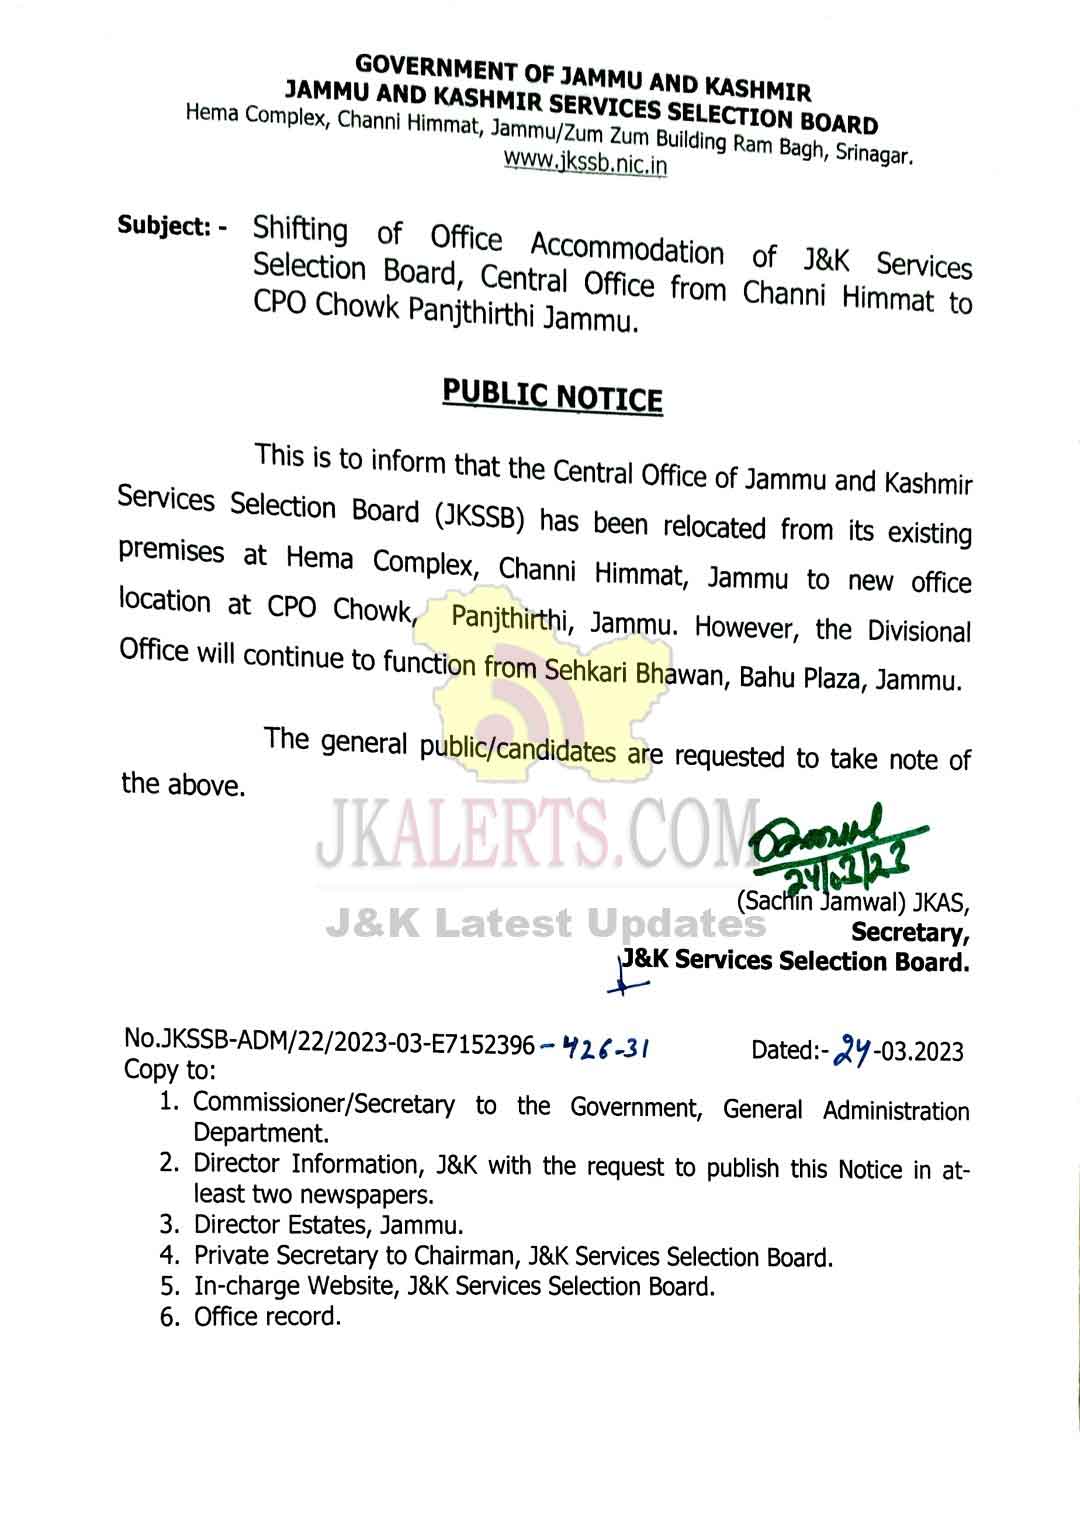 JKSSB Shifted office to new location in Panjthirthi, Jammu.